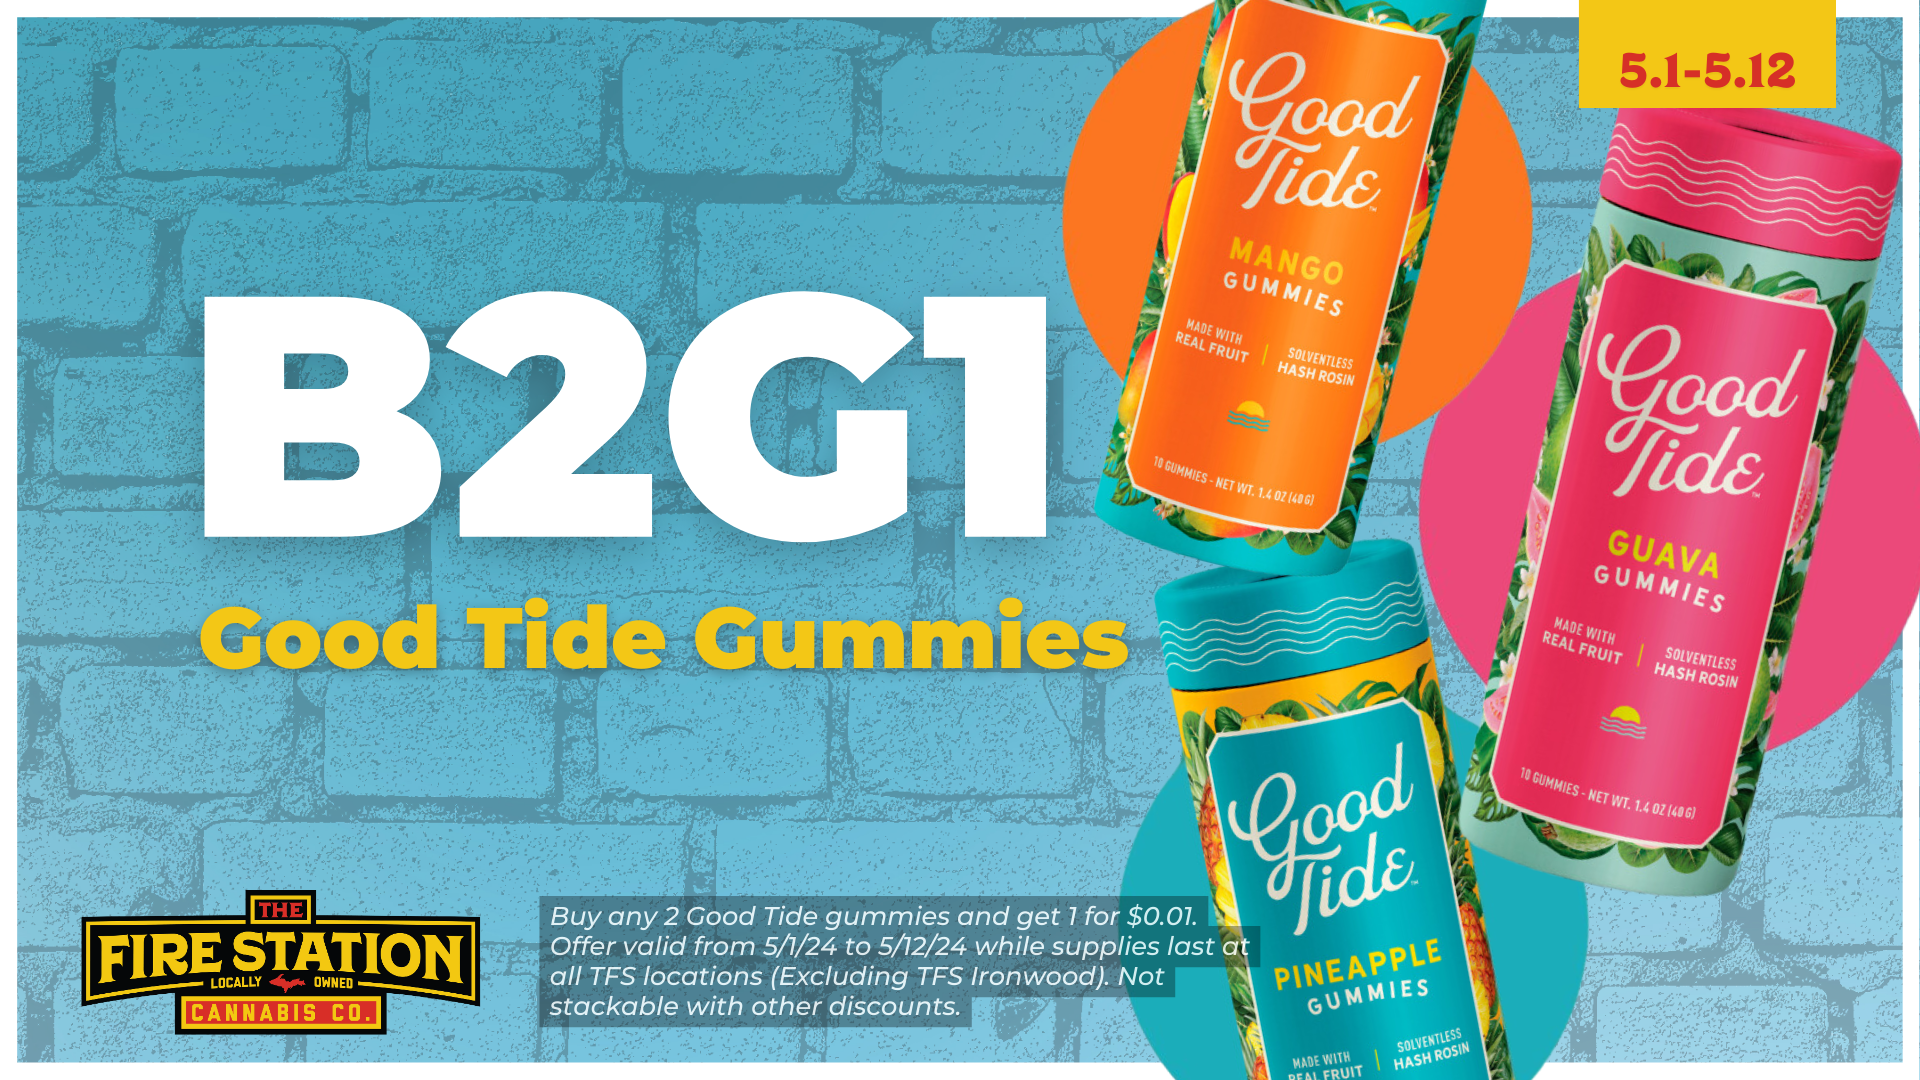 Buy any 2 Good Tide gummies and get 1 for $0.01. Offer valid from 5/1/24 to 5/12/24 while supplies last at all TFS locations (Excluding TFS Ironwood). Not stackable with other discounts.